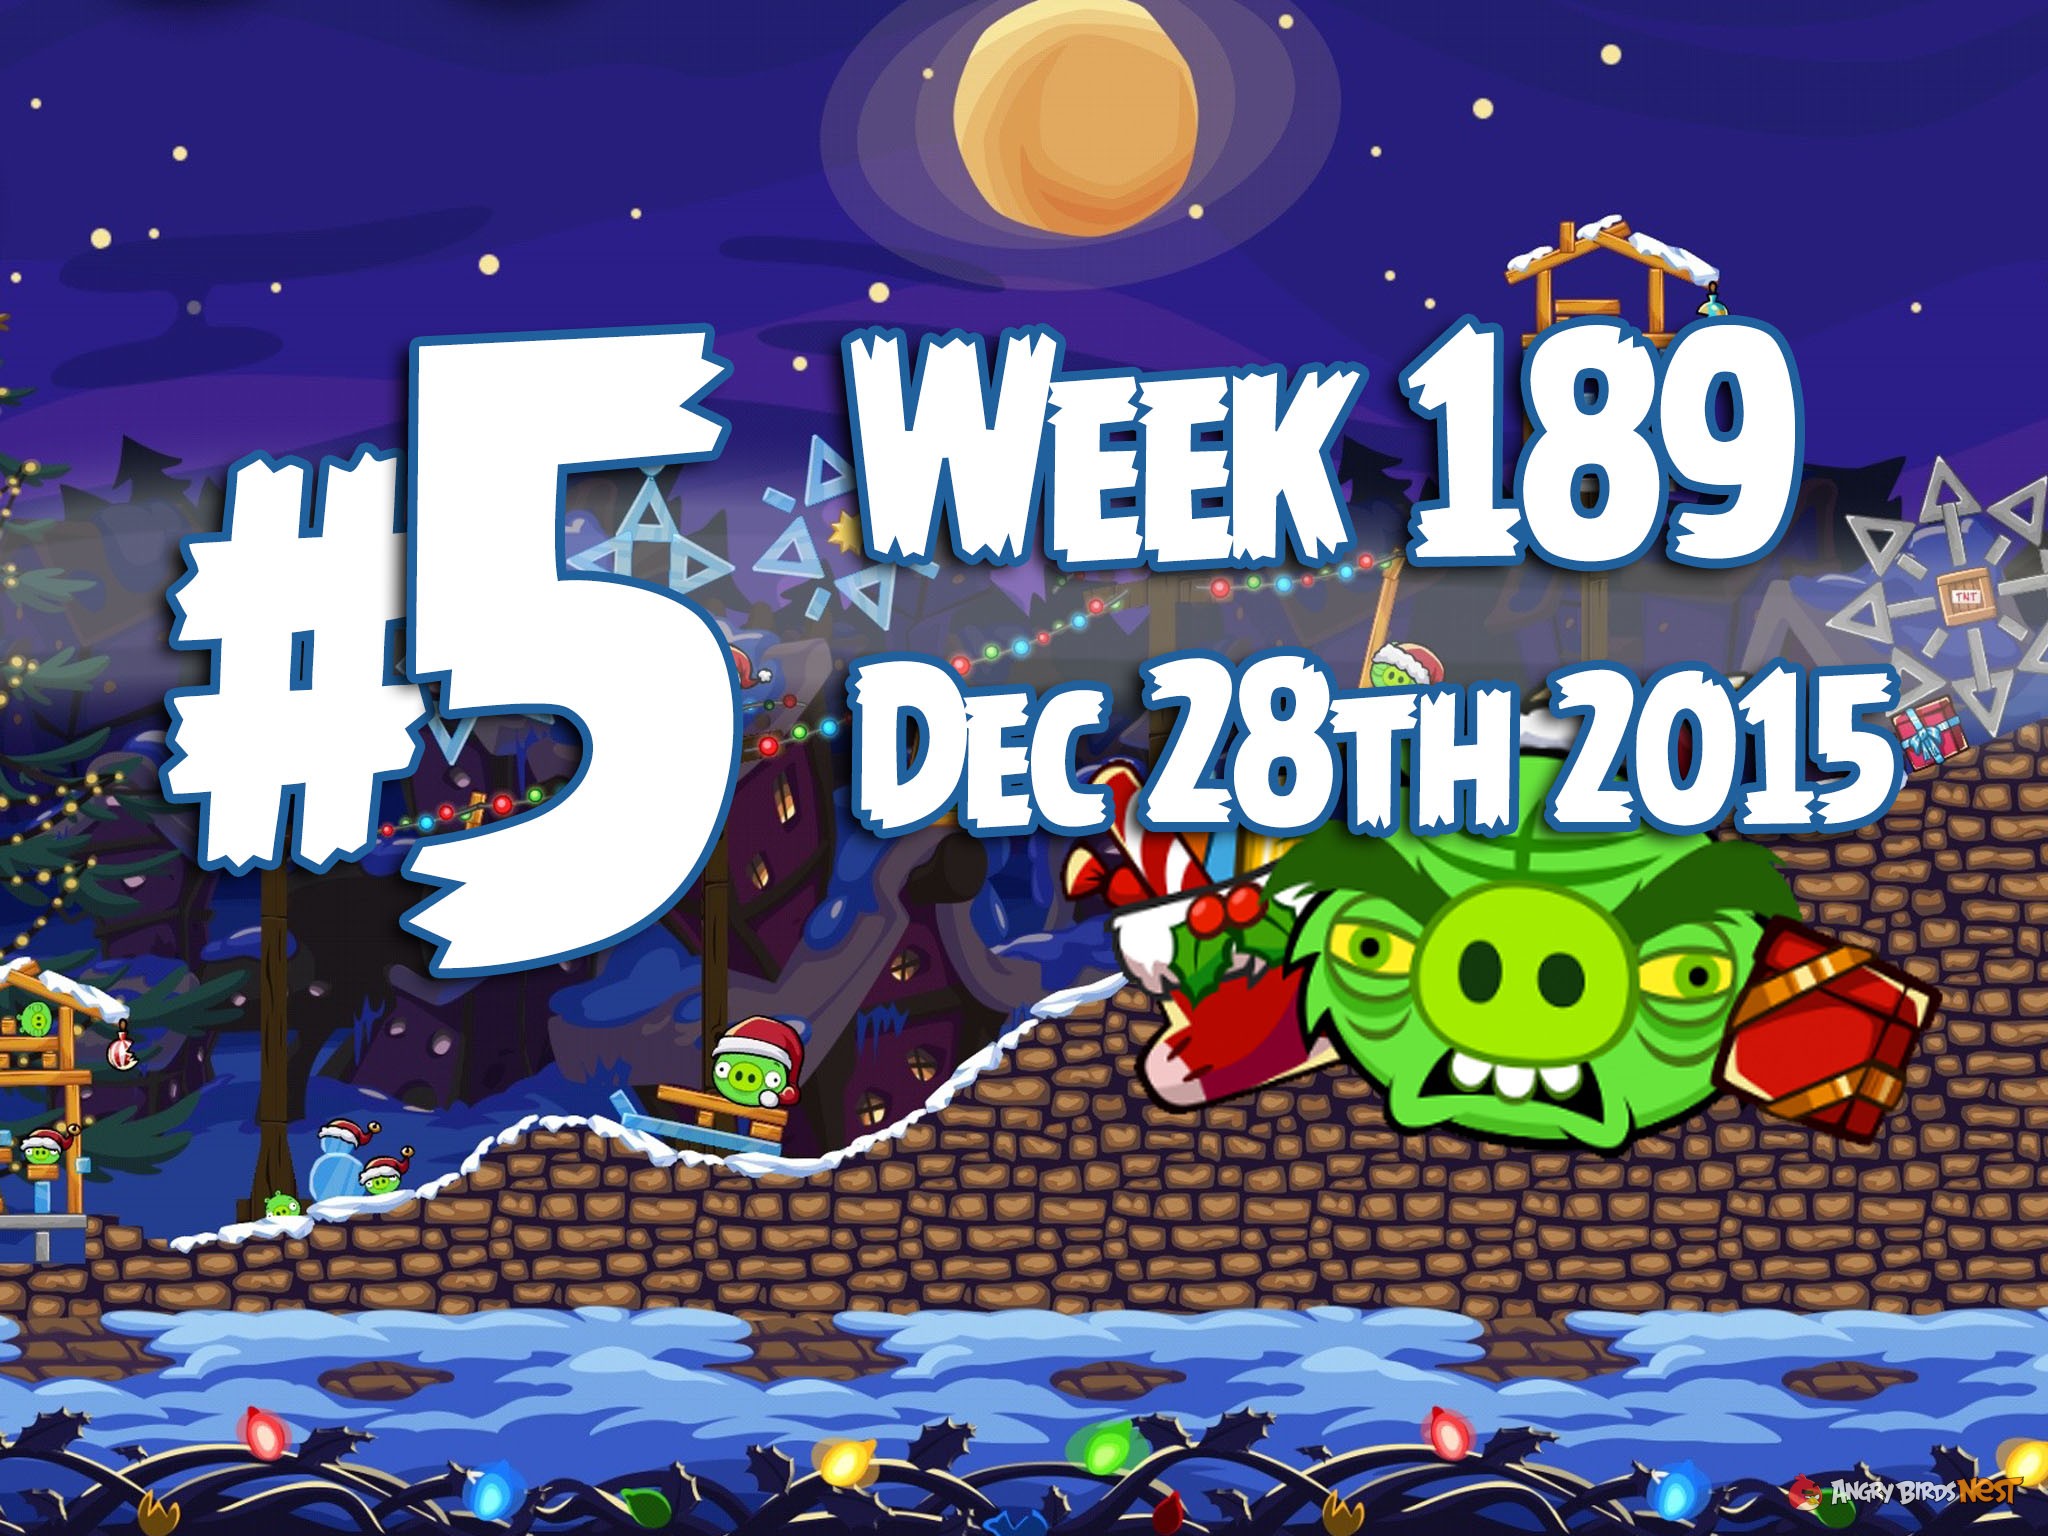 Angry Birds Friends Week 189 Level 5